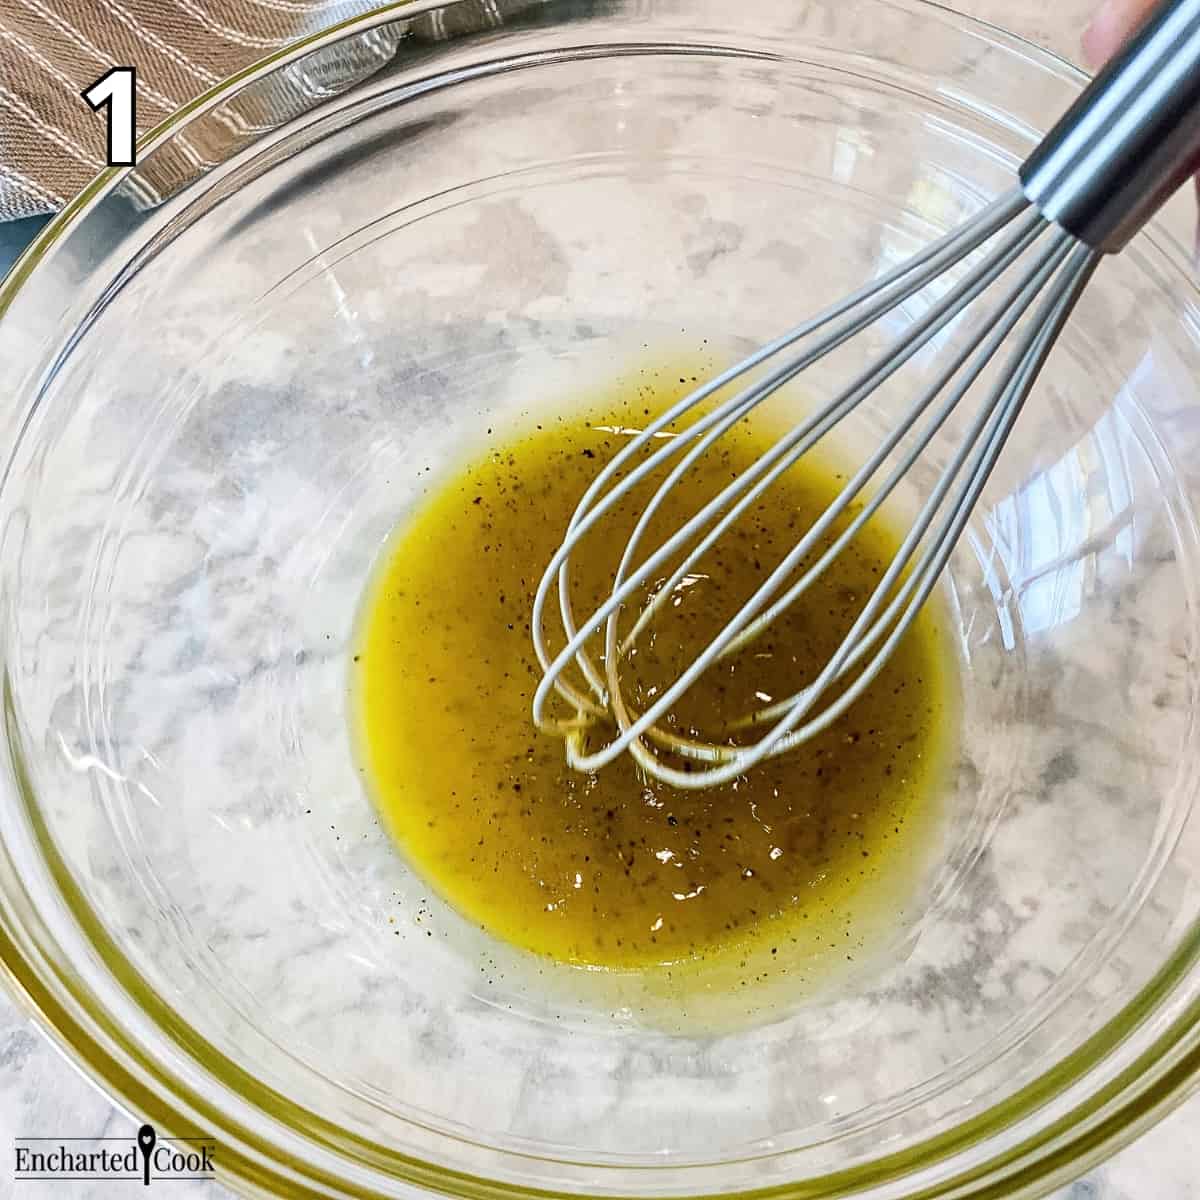 Process Photo 1 - Whisking the vinaigrette in a glass bowl.